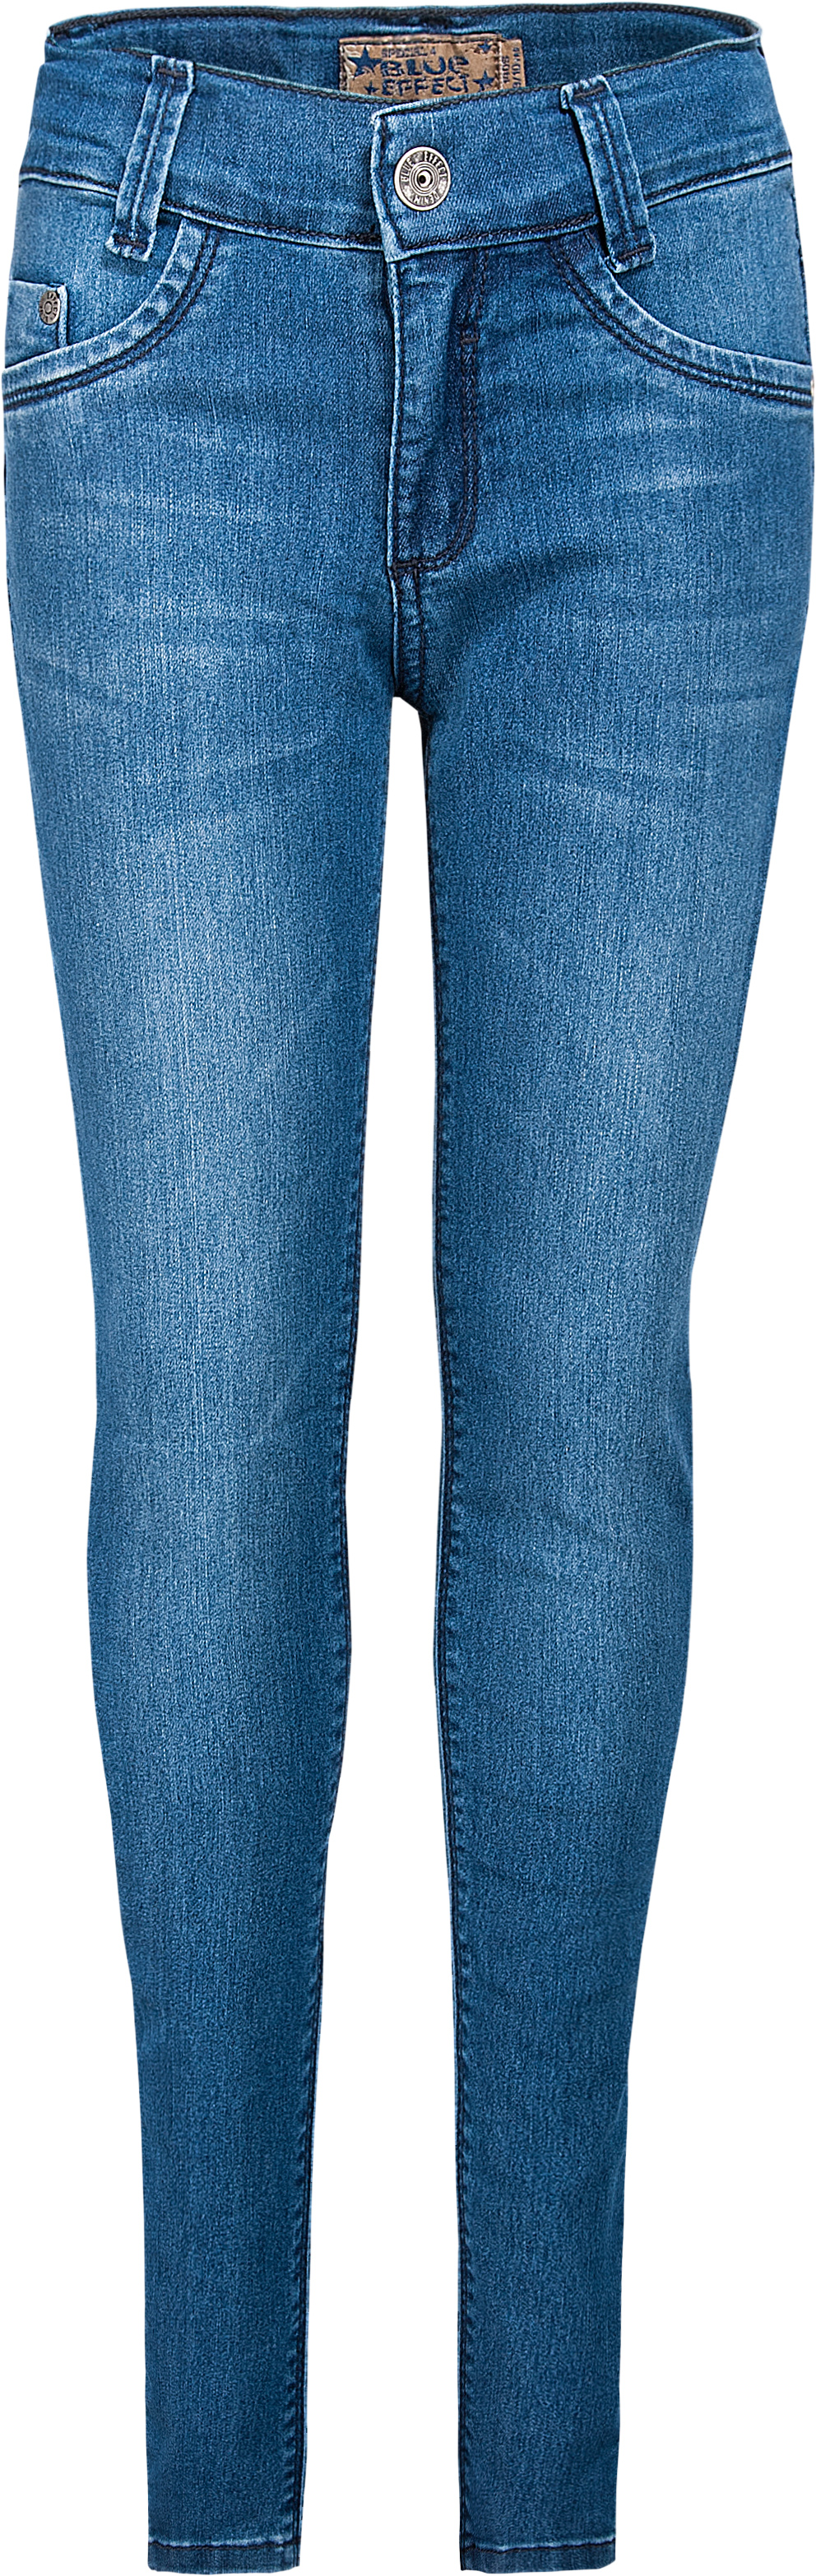 0144-NOS Girls Jeans Jegging Special-4, Skinny, available in Slim, Normal, Wide